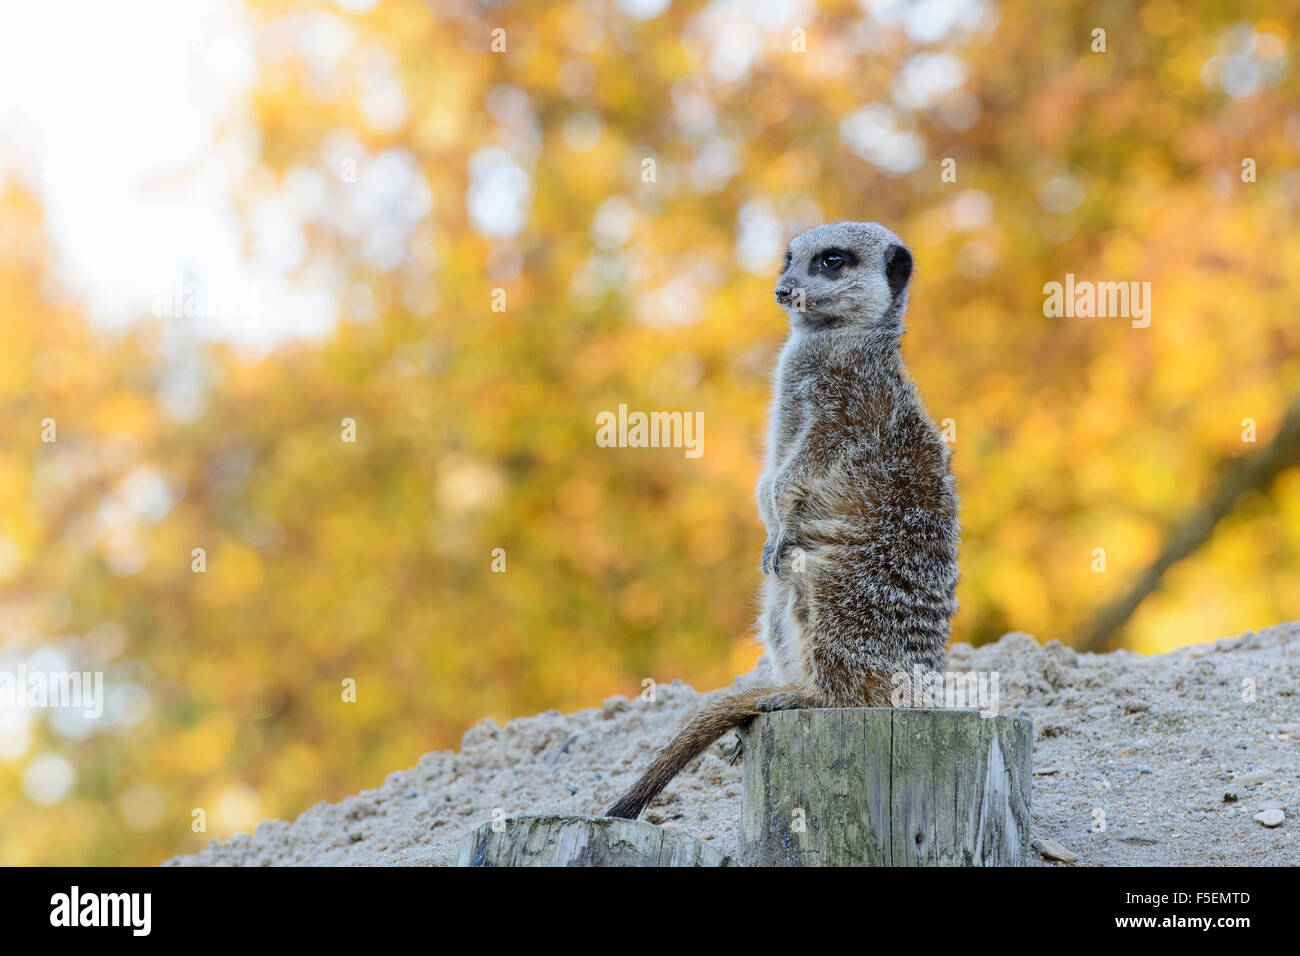 A lone meerkat 'suricata suricatta' looks out for predators while on guard duty at Longleat Safari Park, Wiltshire, England, UK Stock Photo